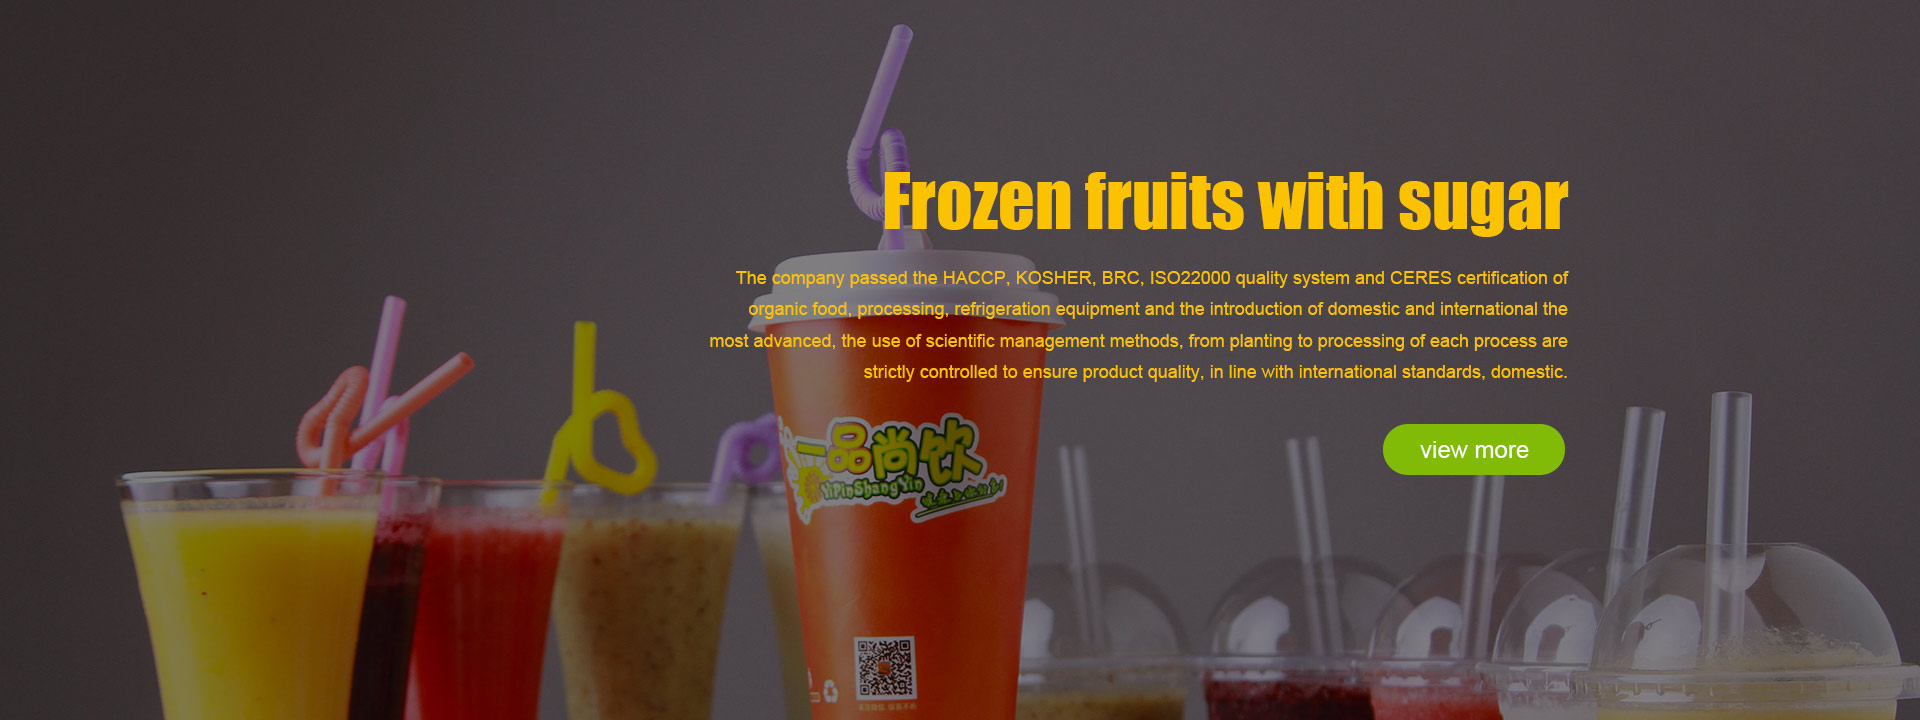 Frozen fruits with sugar